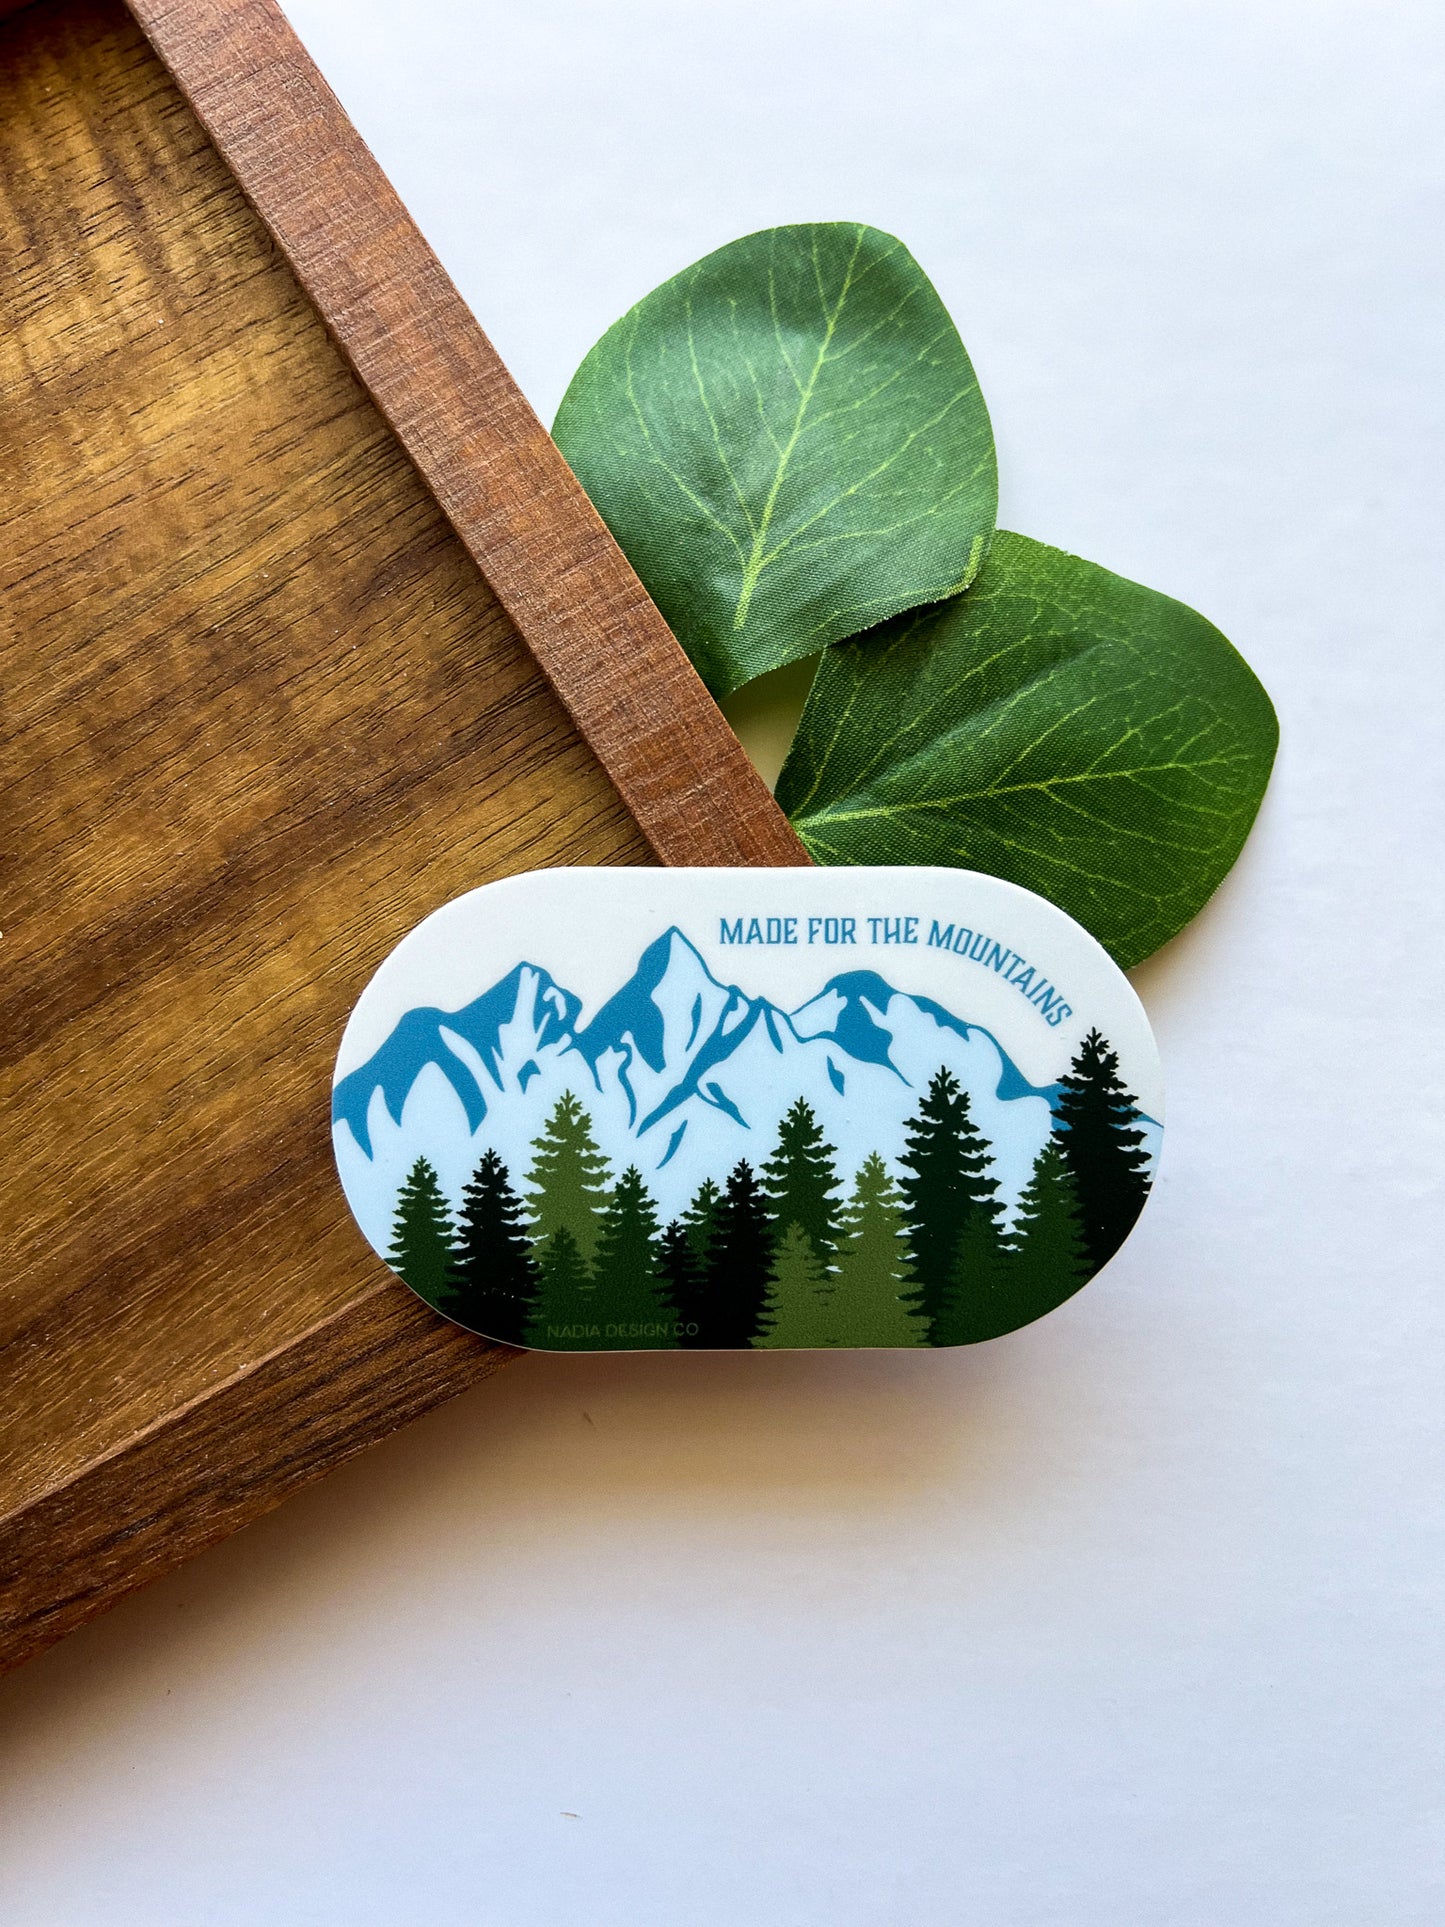 Made for the Mountains Sticker